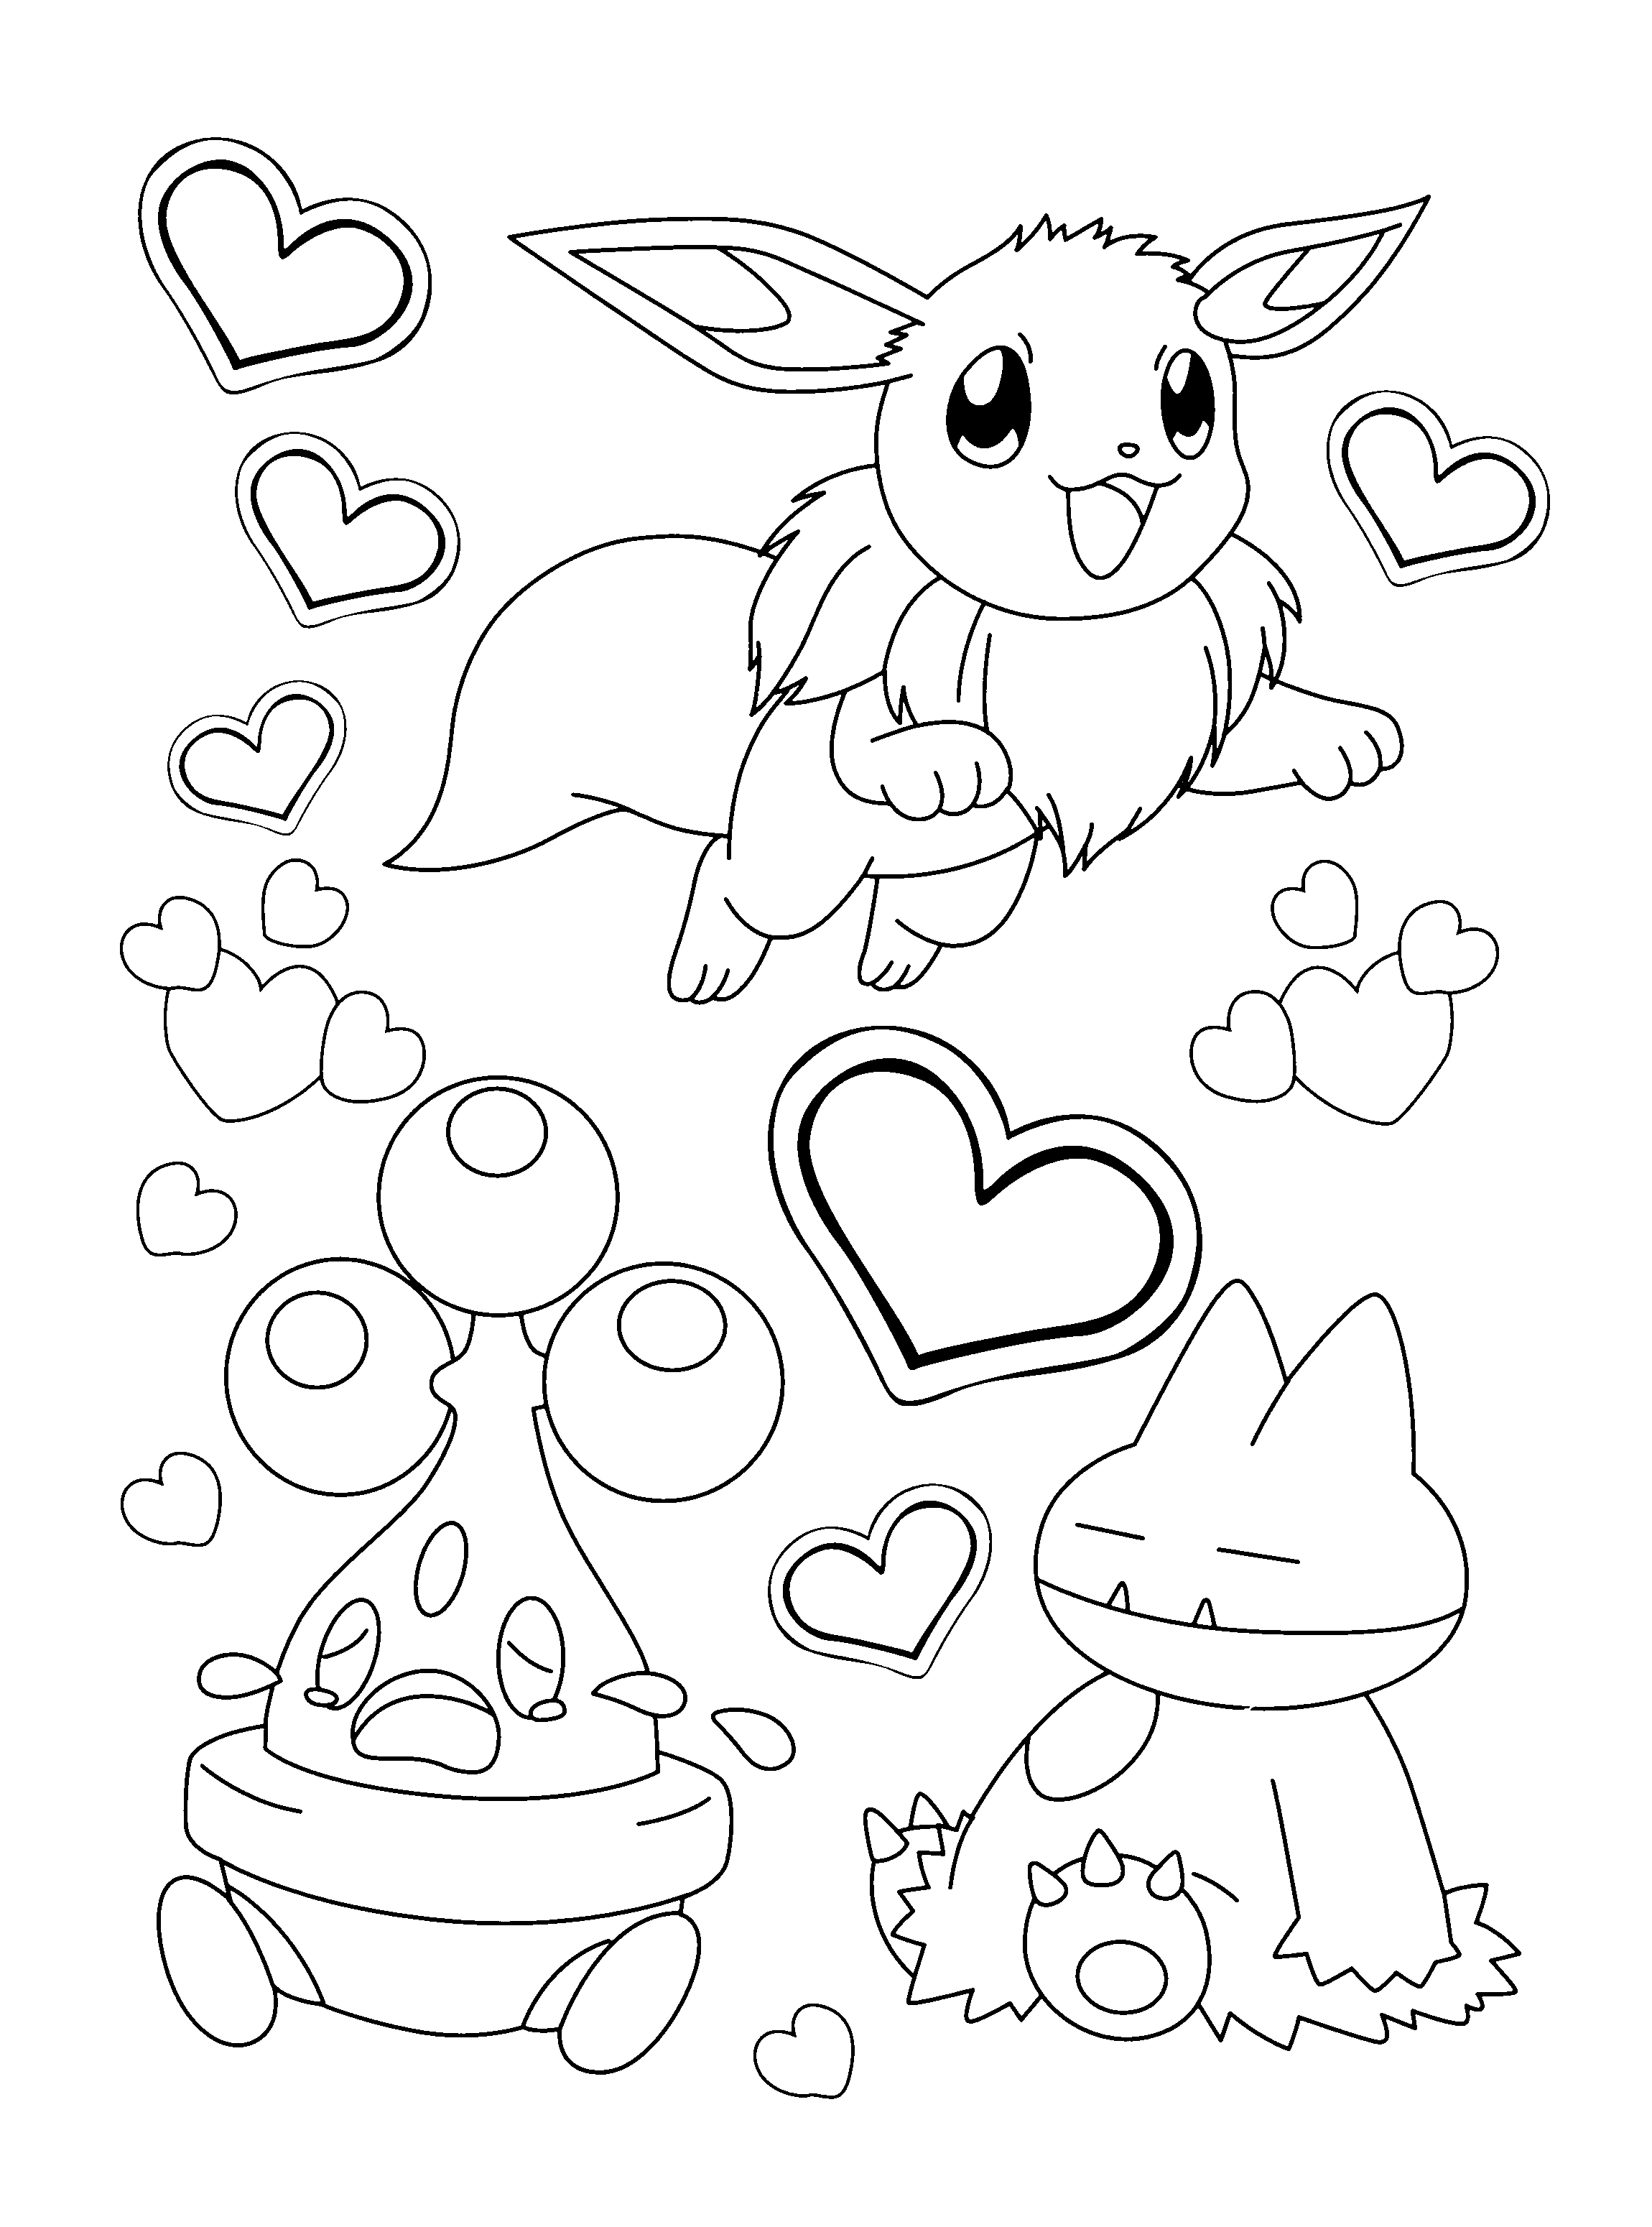 Grass Type Pokemon Coloring Pages At GetColorings Free Printable 